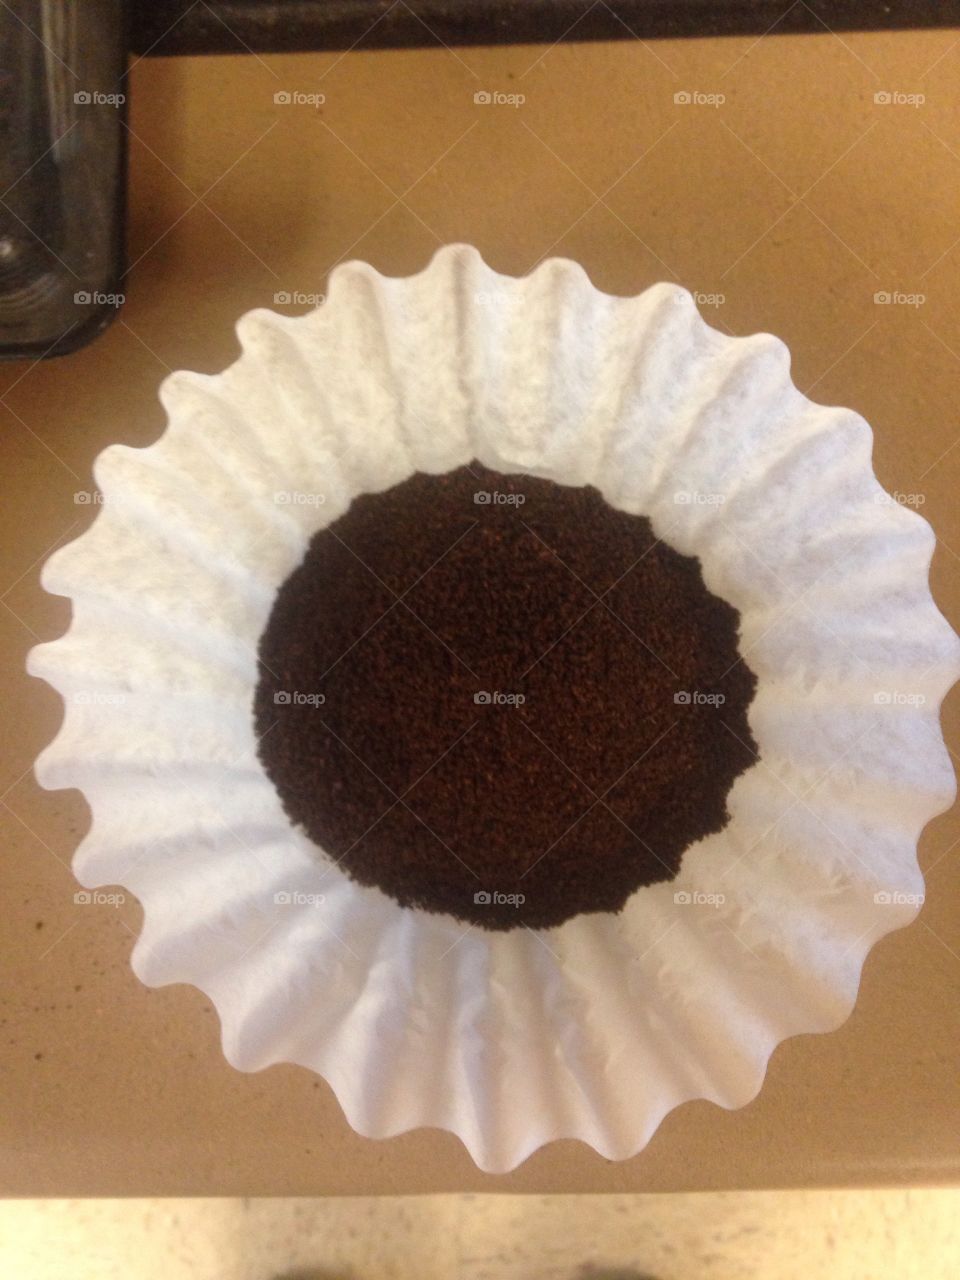 Ground coffee in filter
